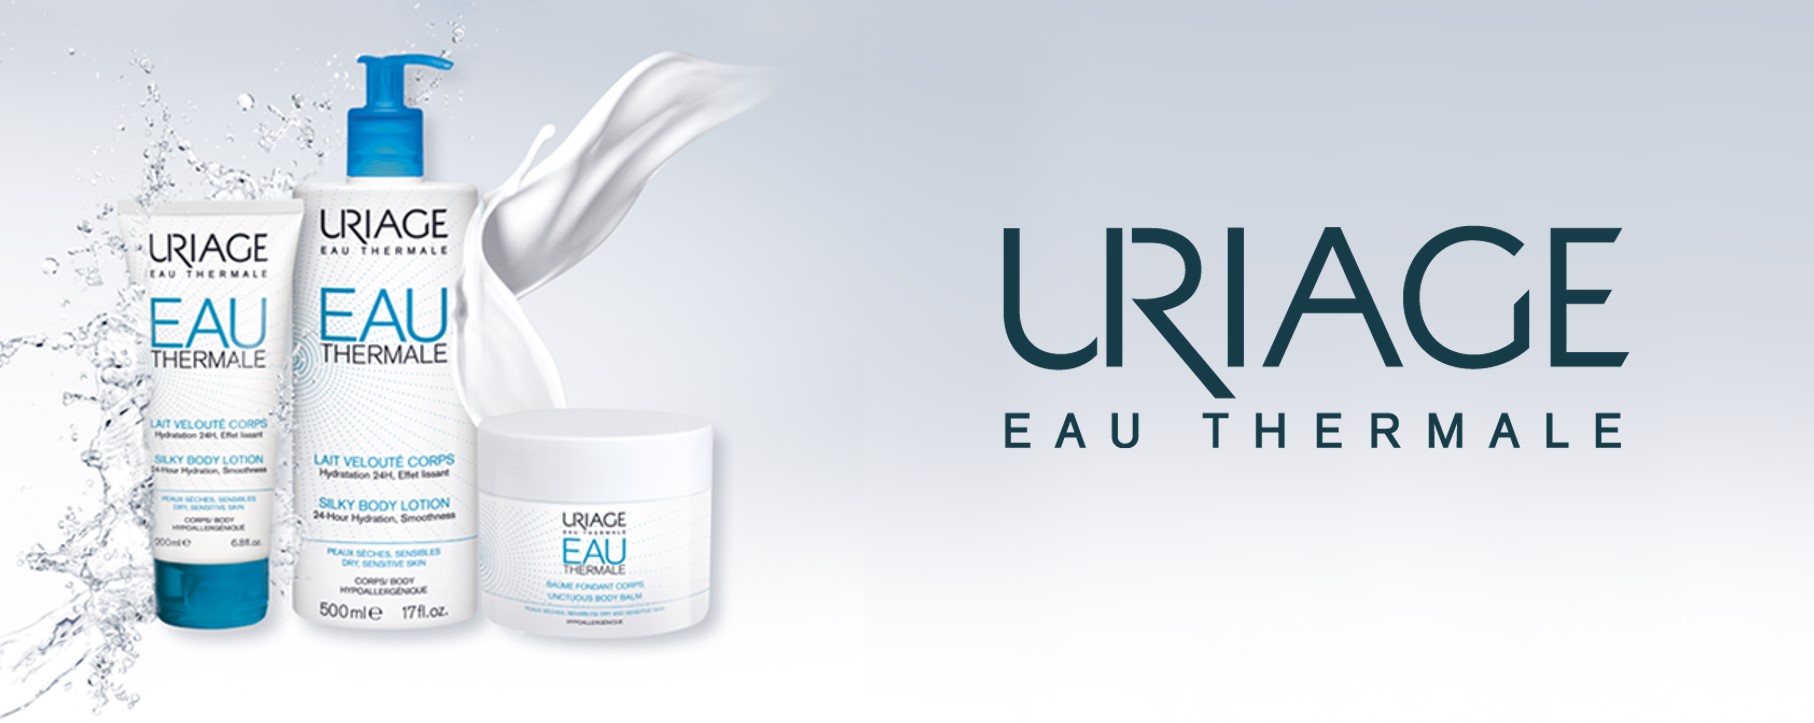 URIAGE EAU THERMALE